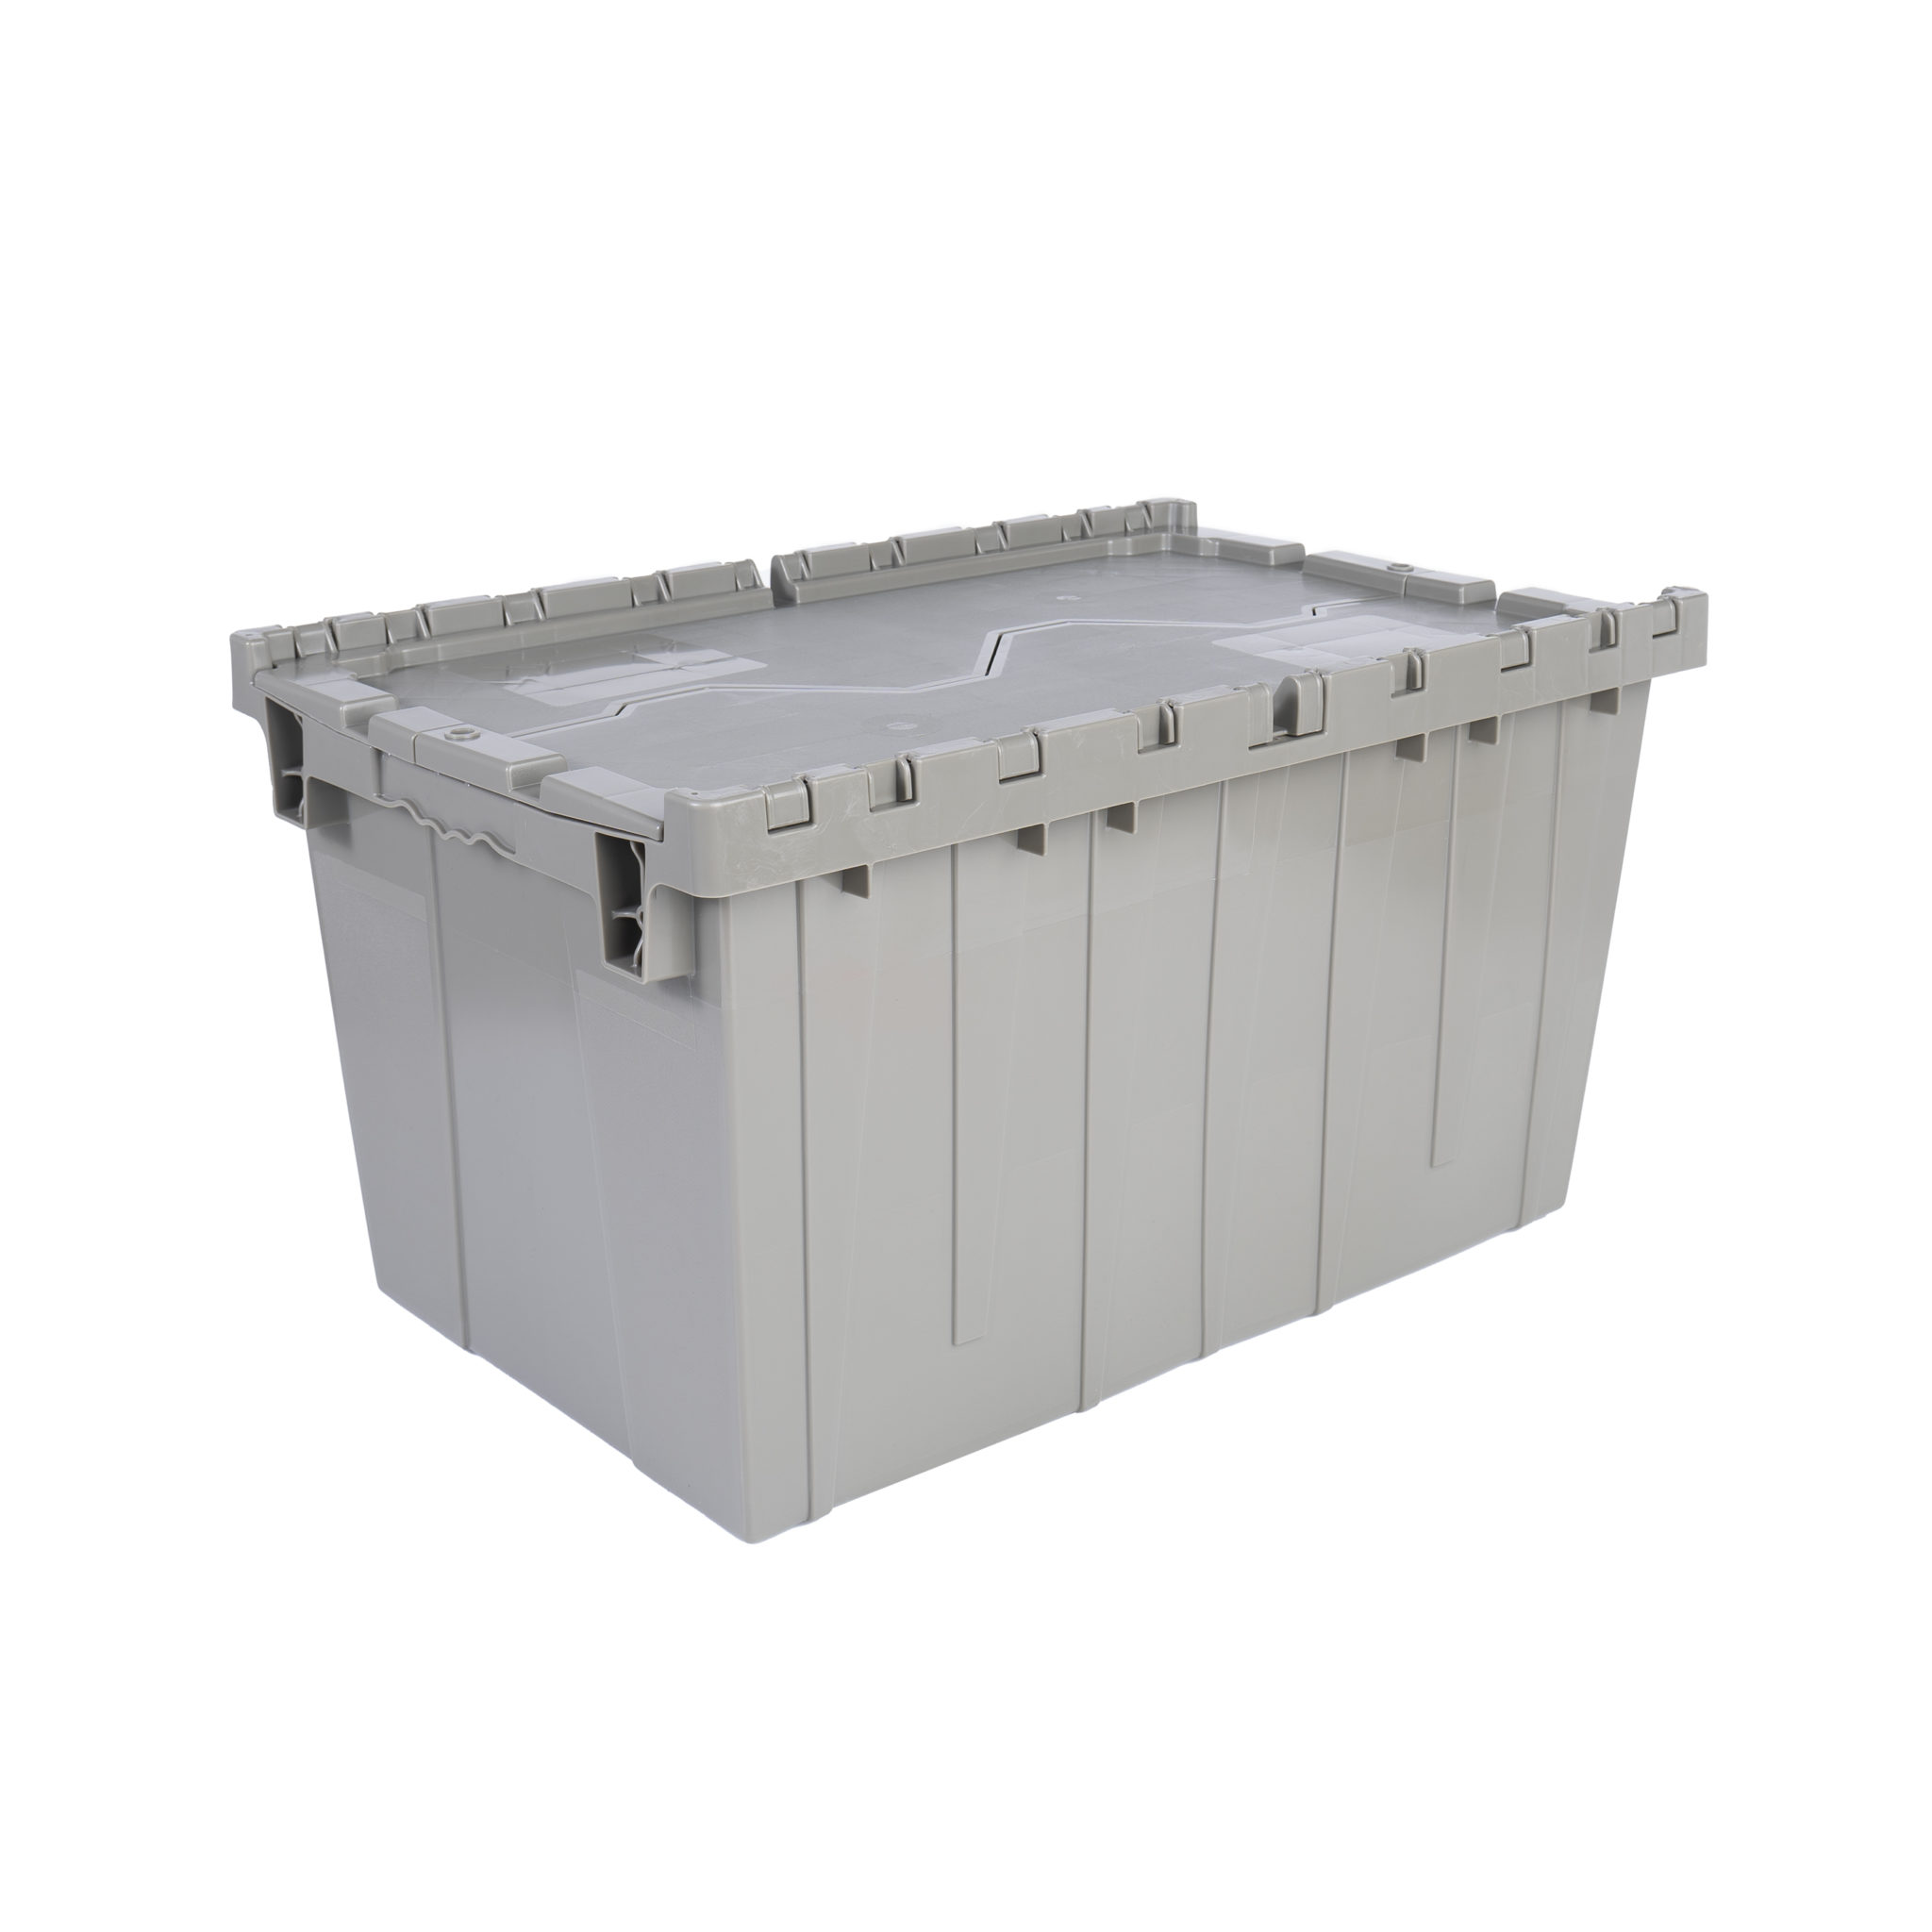 25 x 15 x 14 – Handheld Attached Lid Container